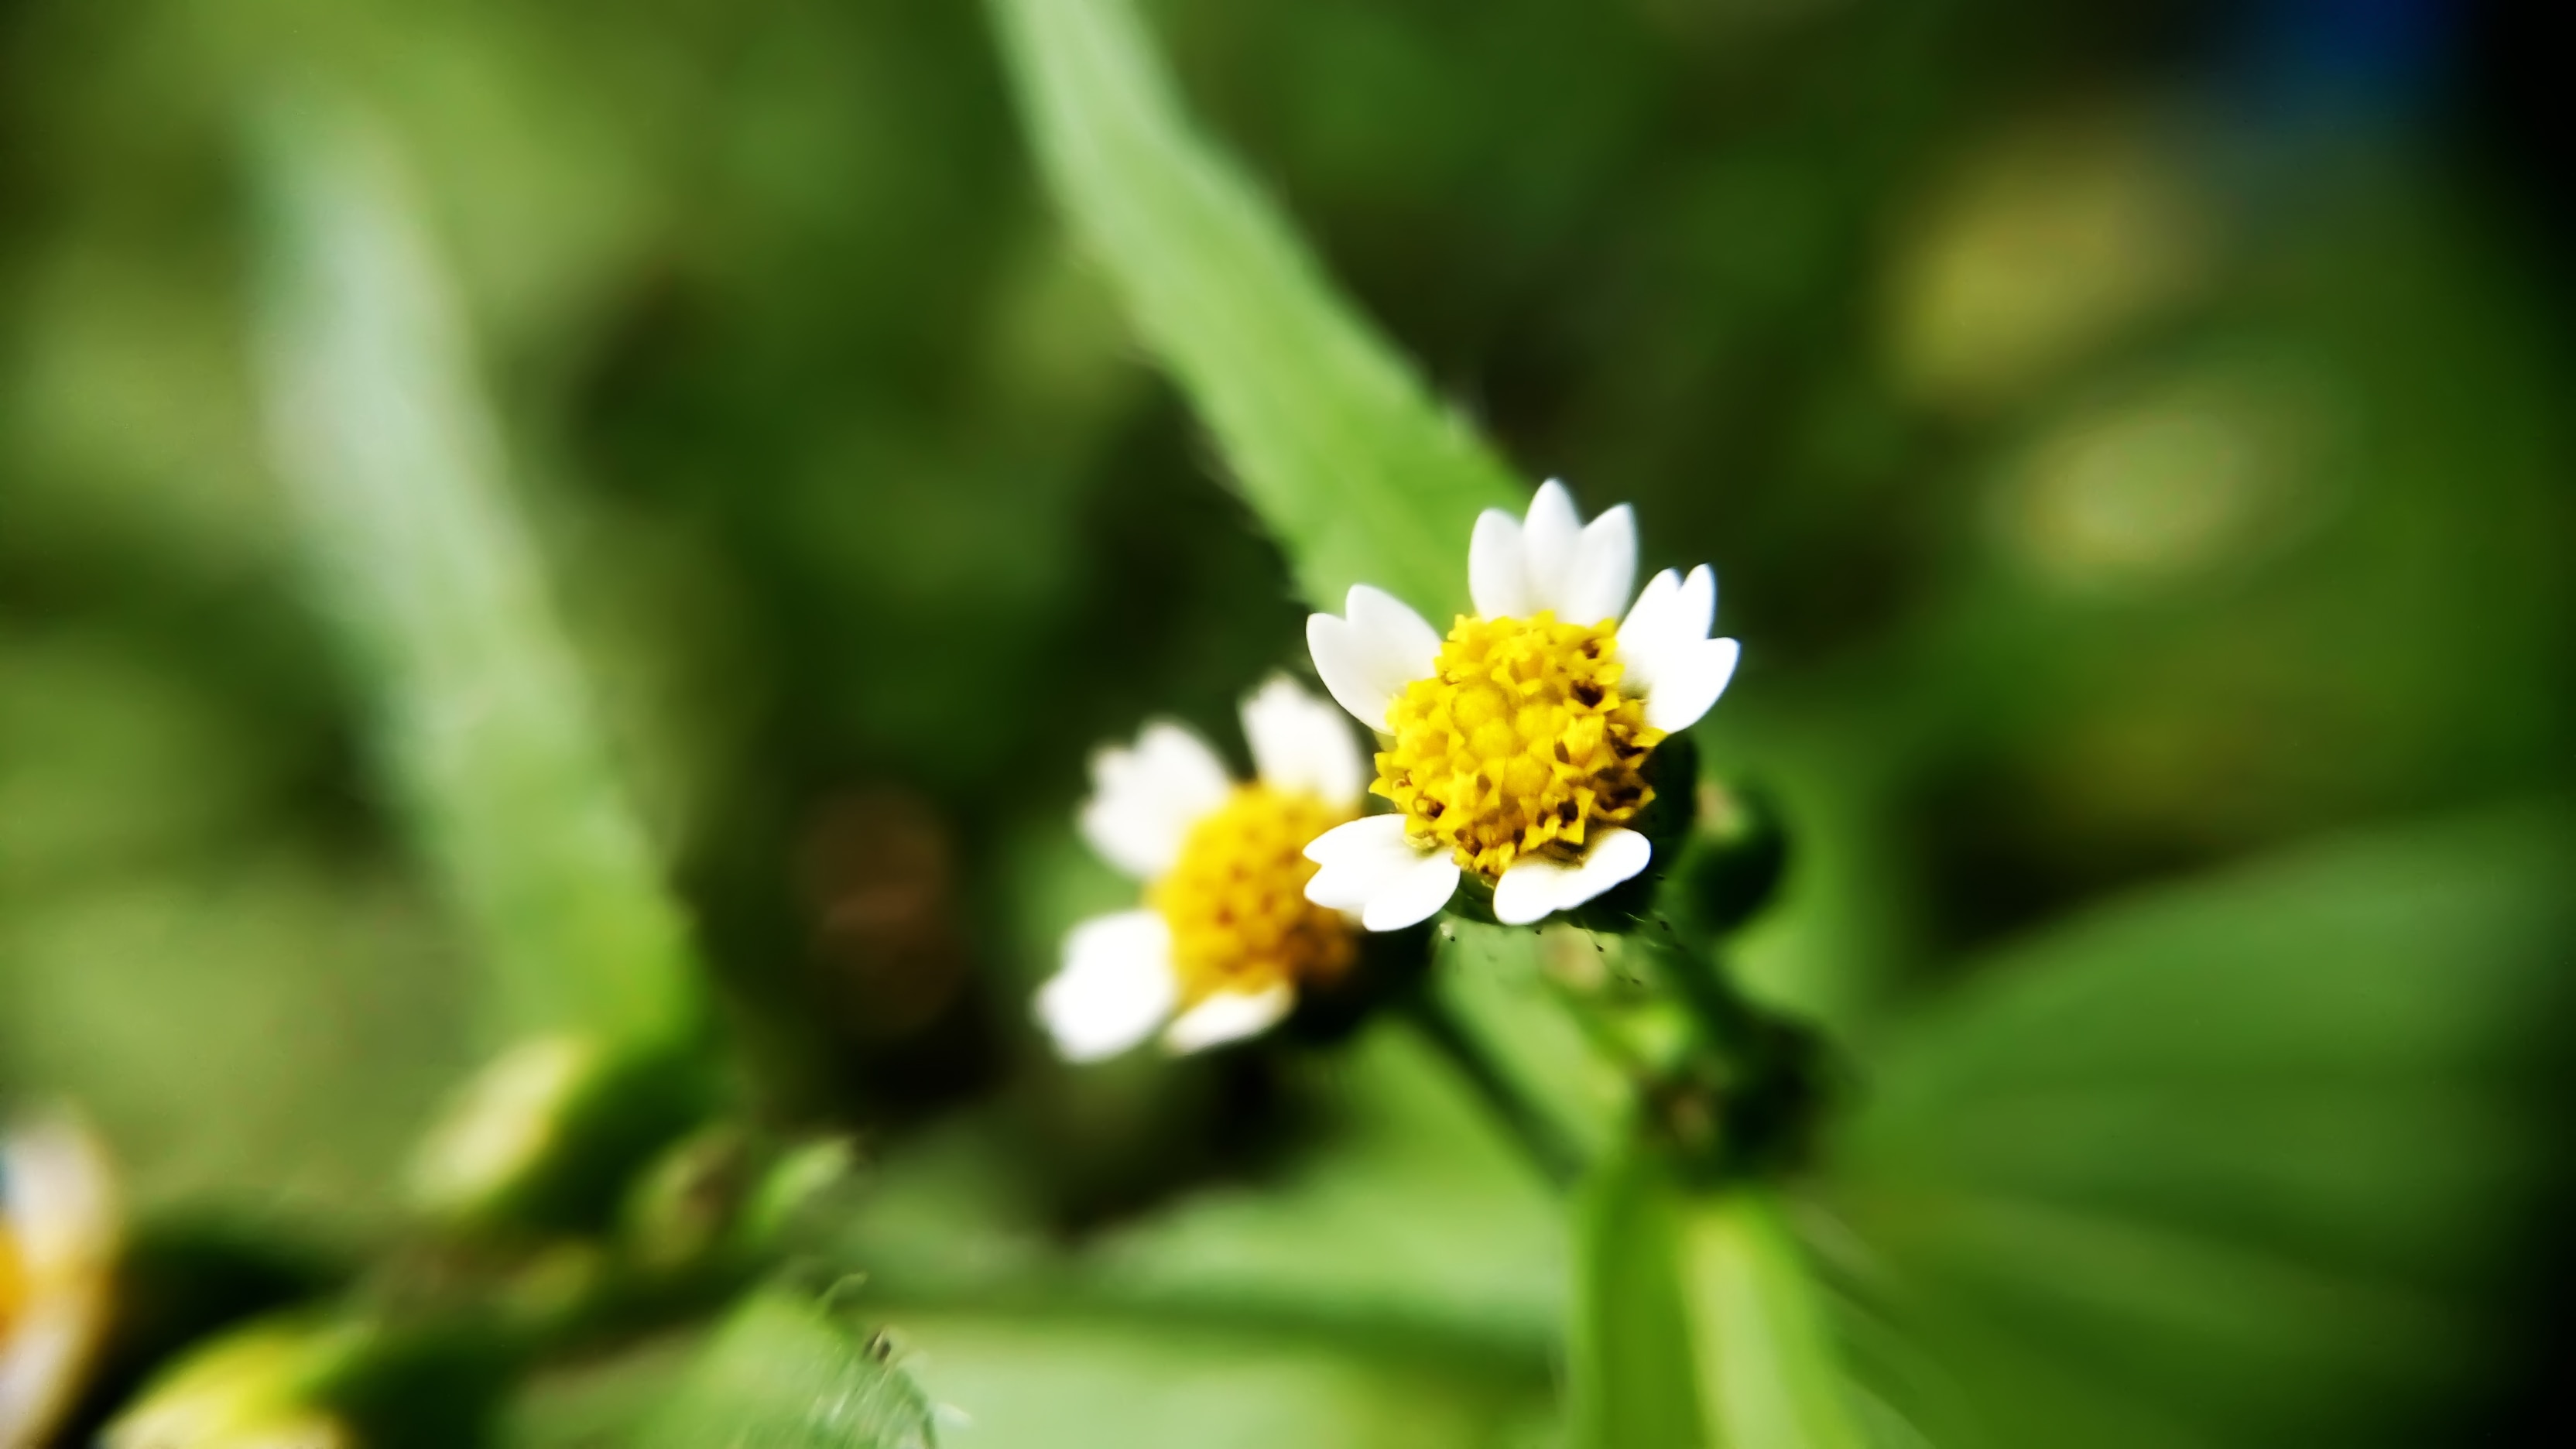 auto focus photography of two flowers during daytime